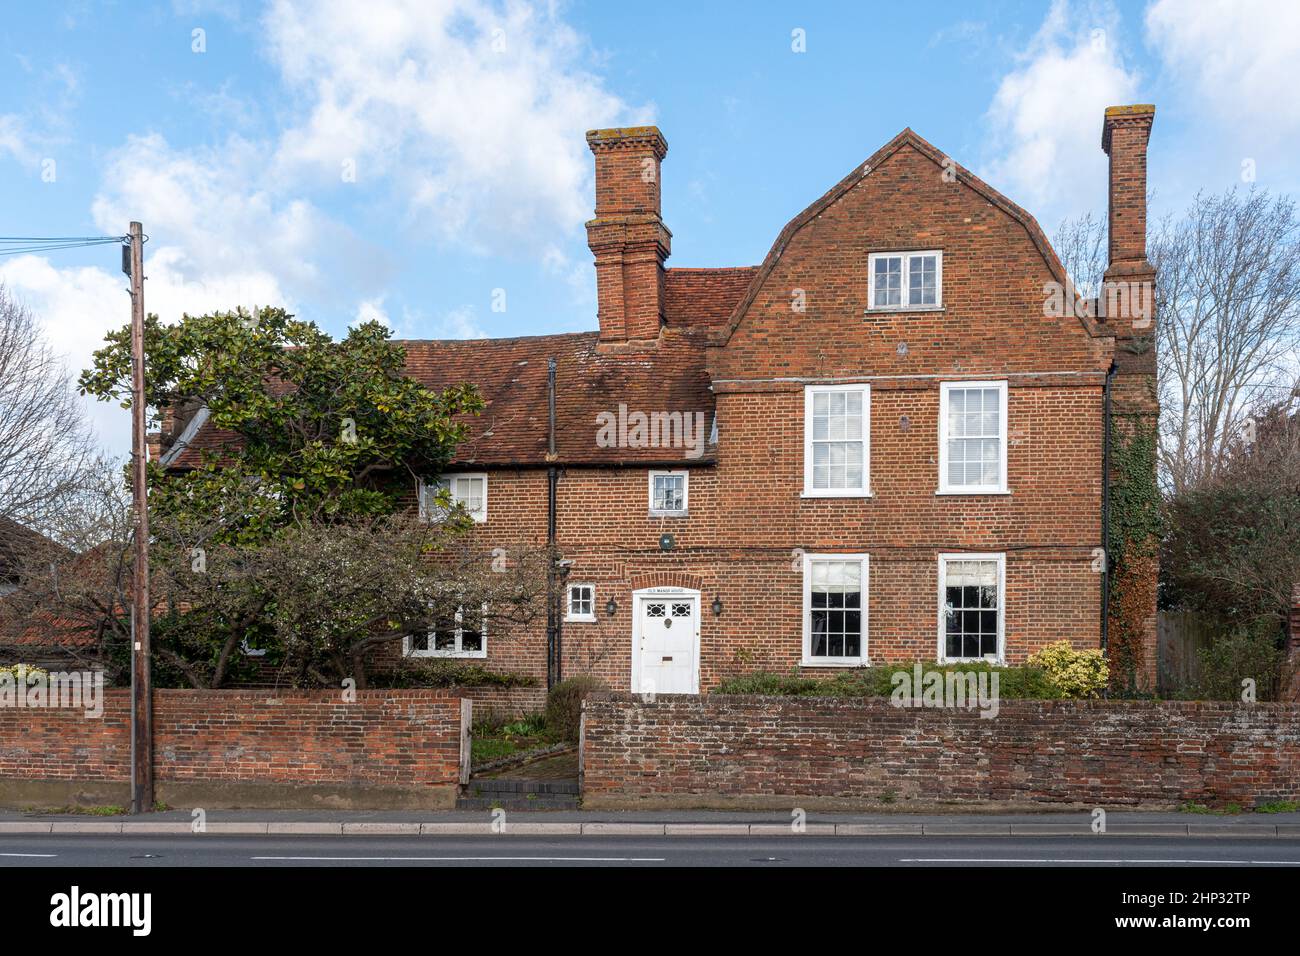 The Old Manor House on High Street, Old Woking village, Surrey, England, UK, a Grade II* Listed Building built on the 17th century Stock Photo